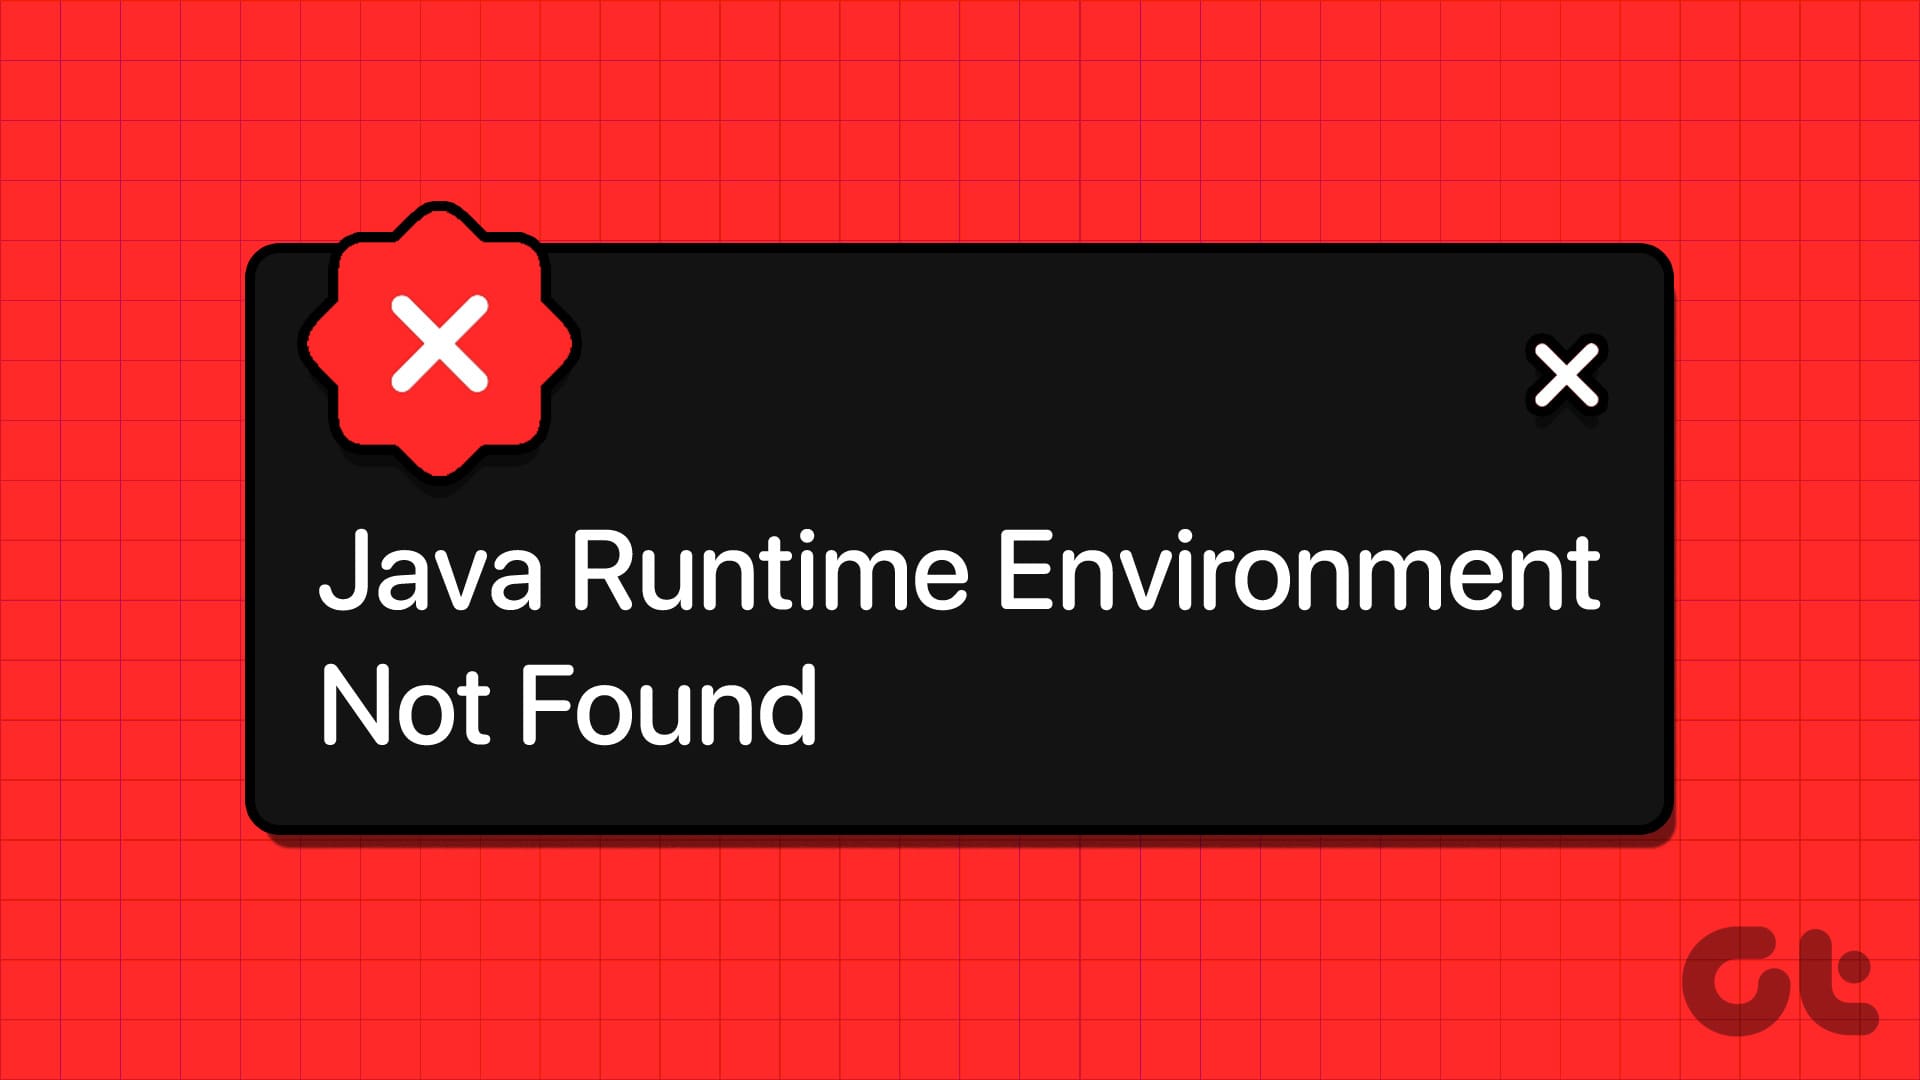 Best_X_Fixes_When_Java_Runtime_Environment_Is_Not_Found_in_Windows_11